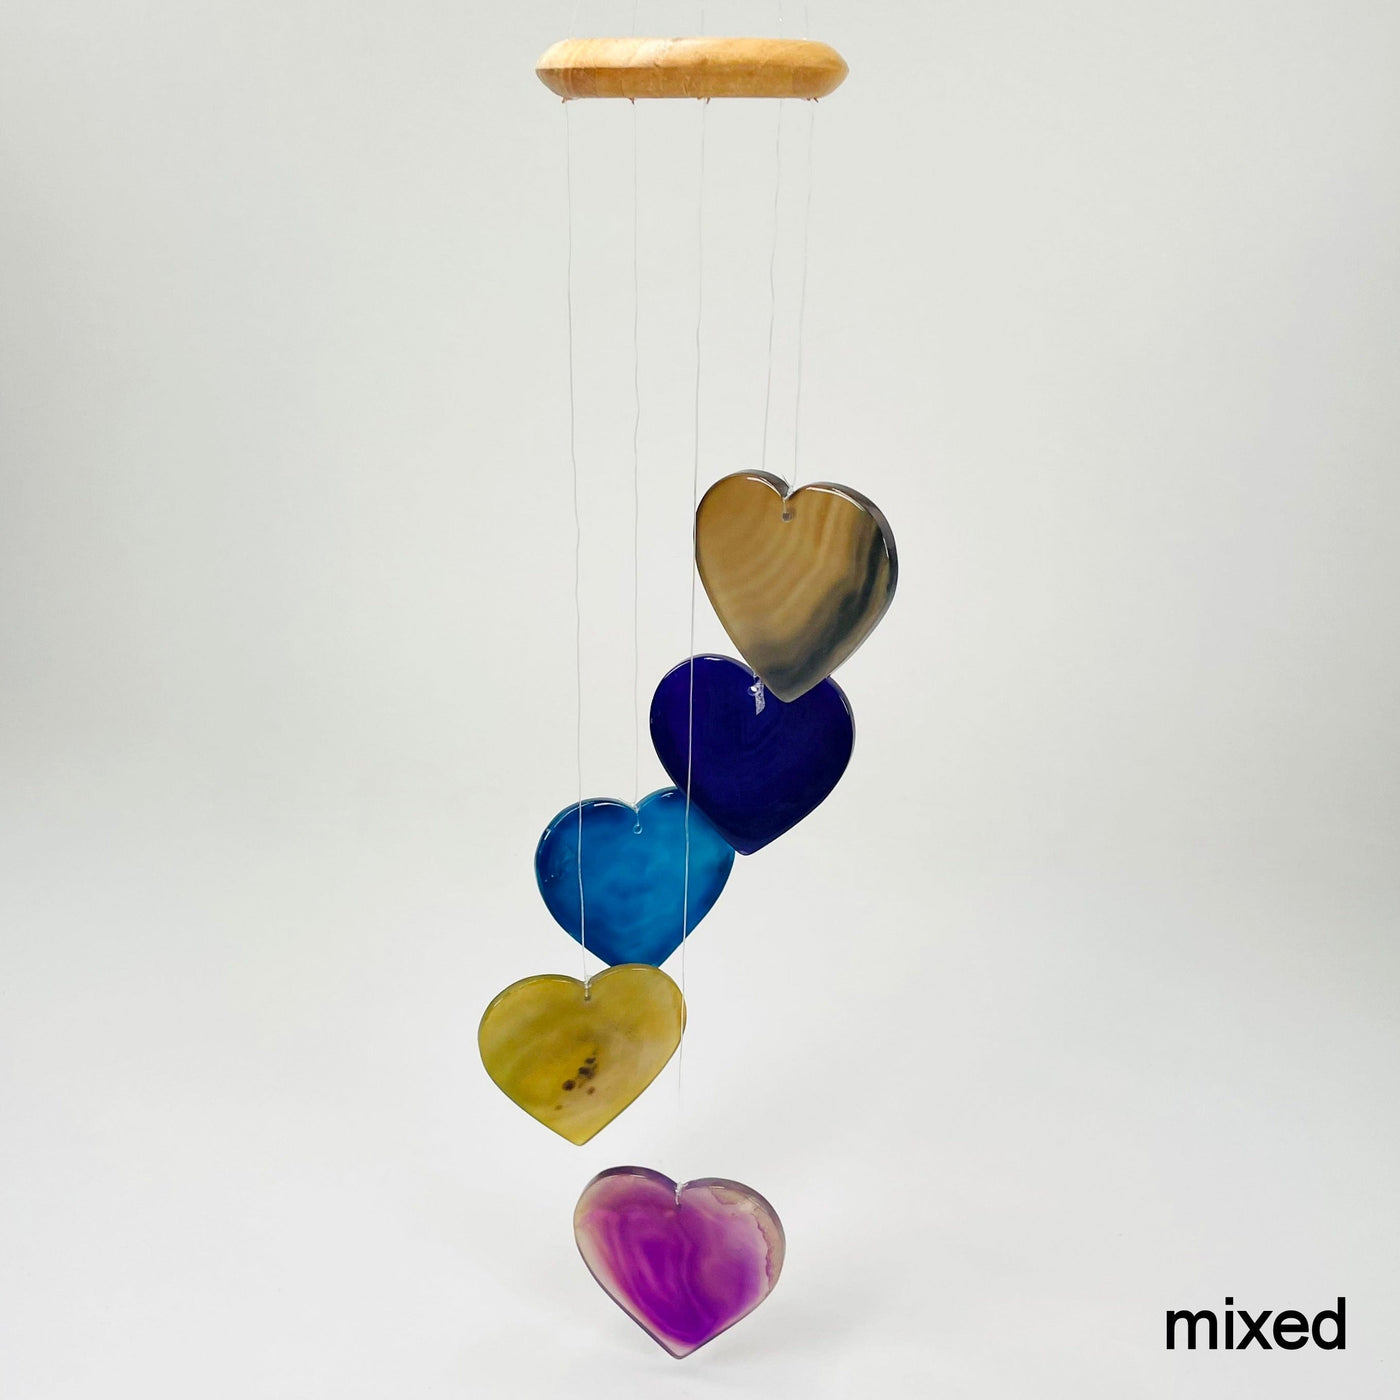 one mixed agate heart wind chime hanging in front of white background